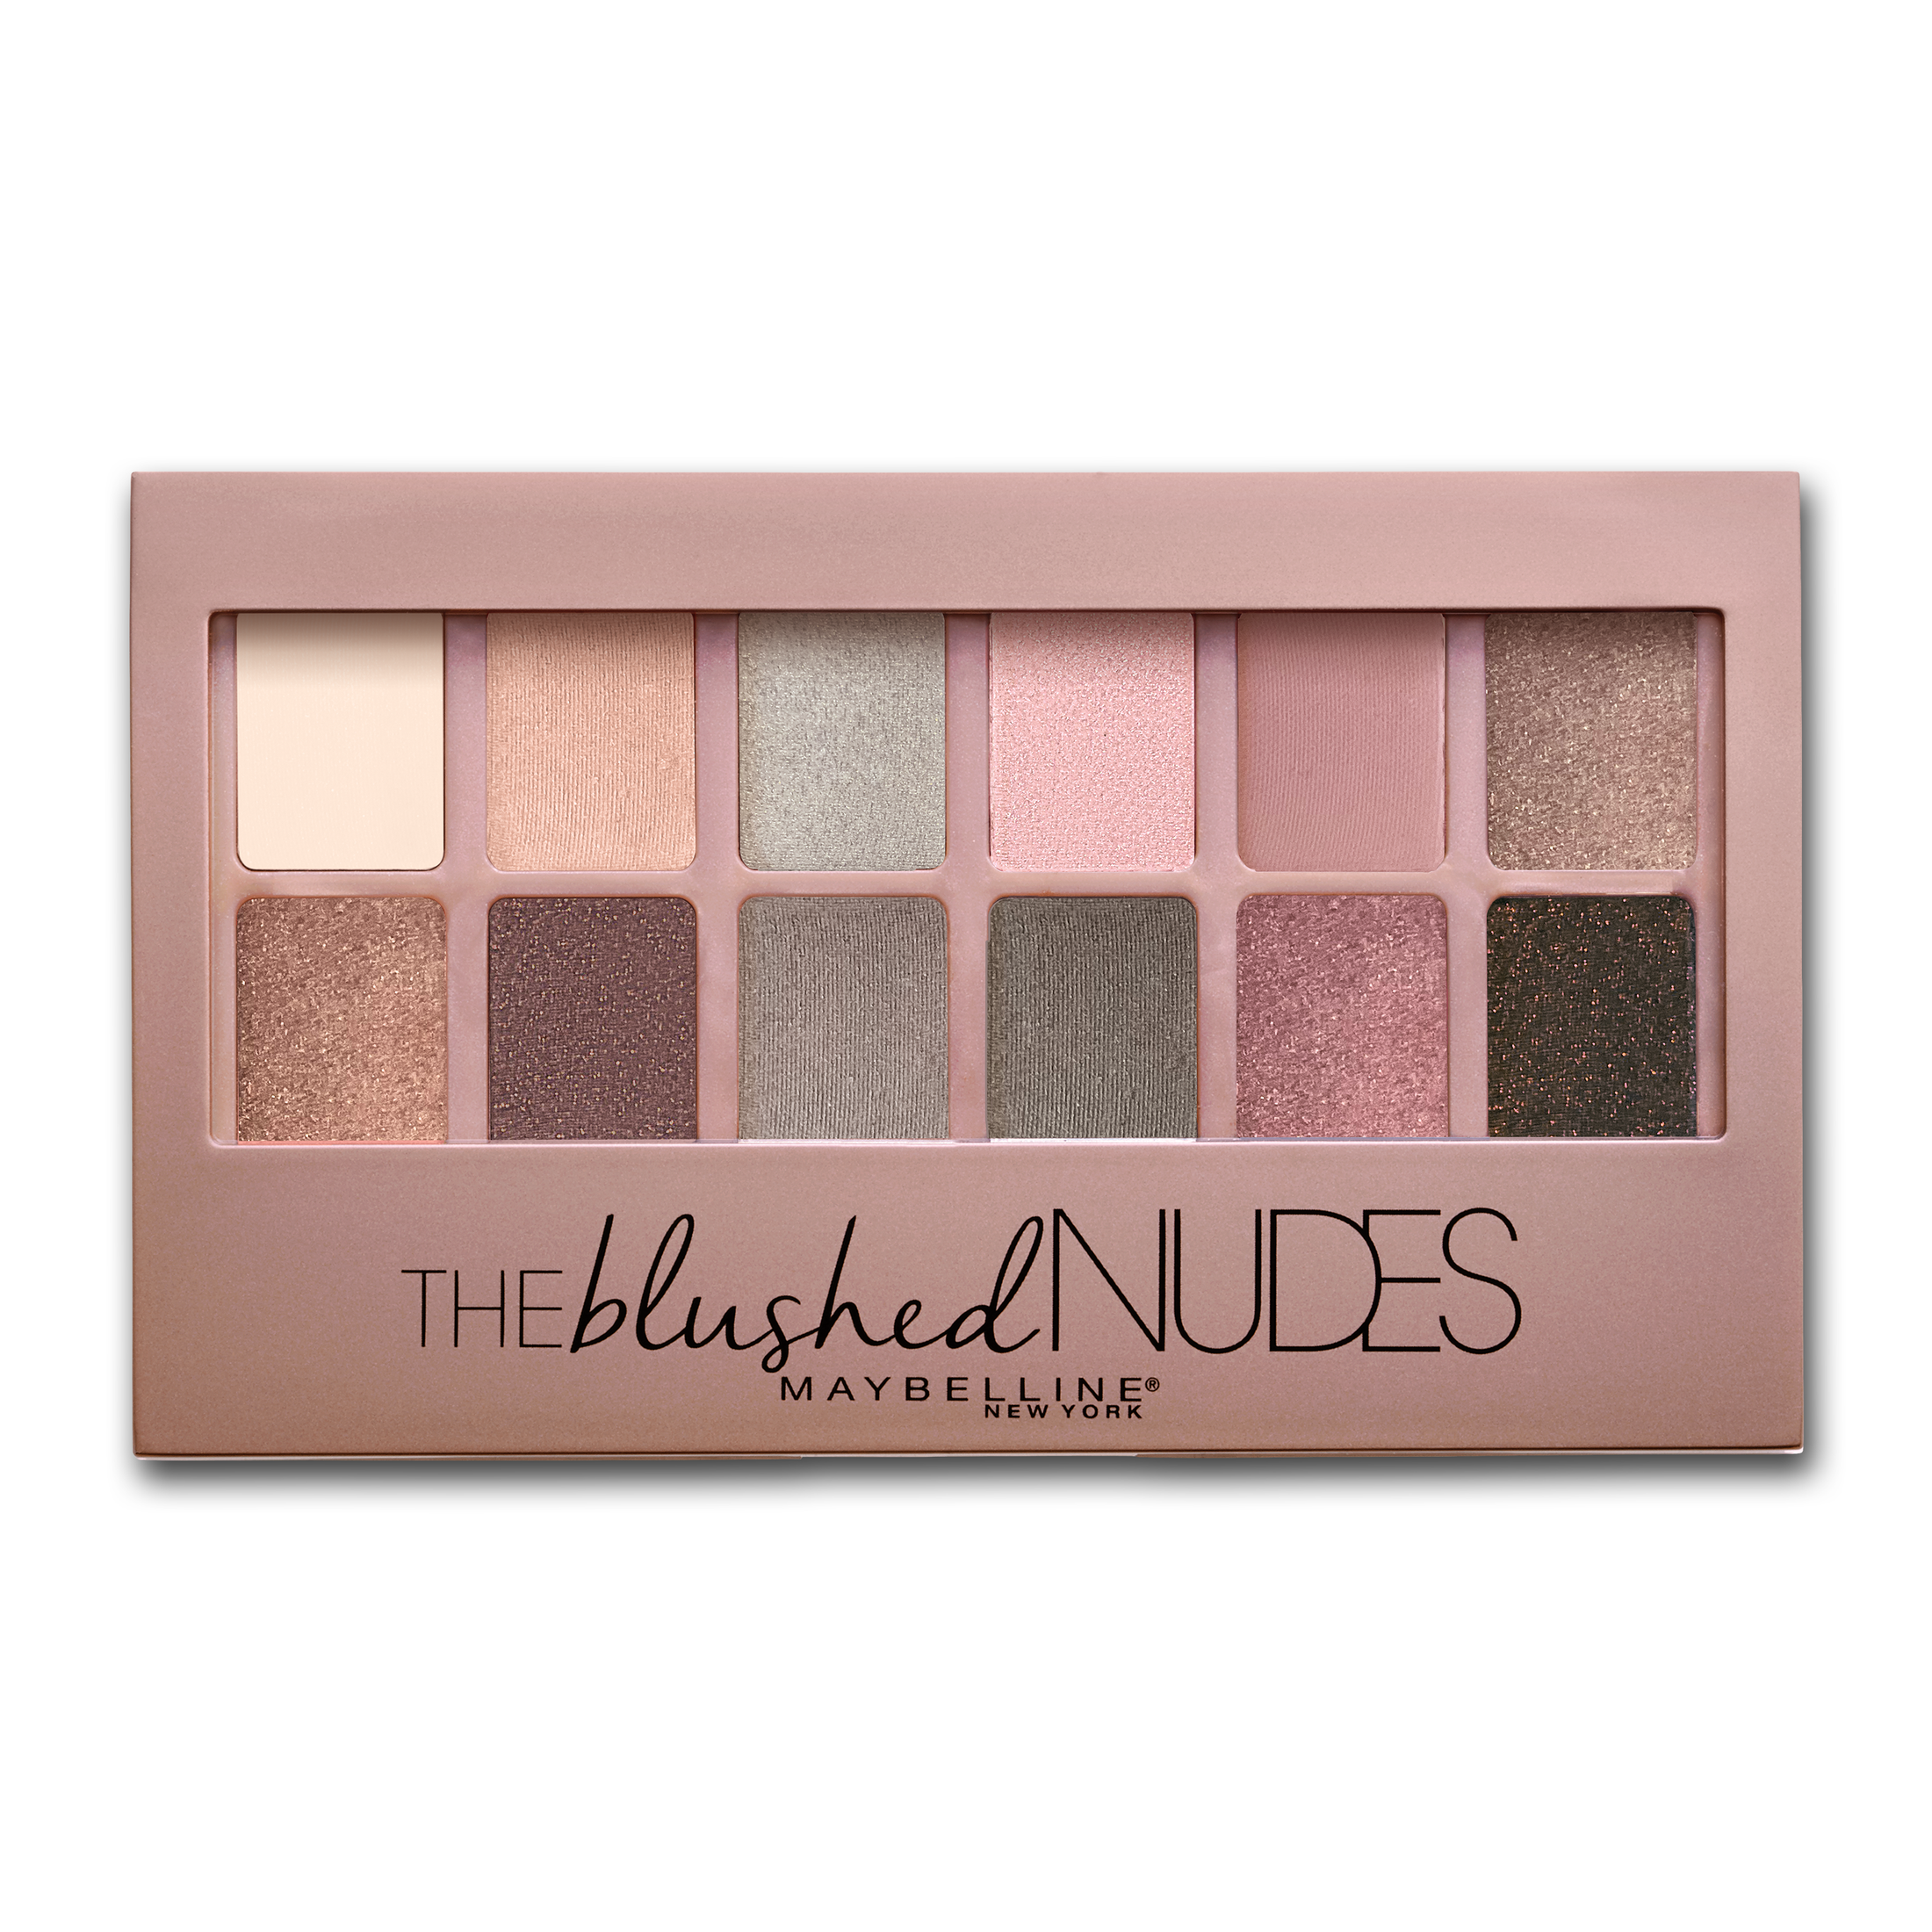 Maybelline The Blushed Nudes Eyeshadow Palette - image 1 of 7